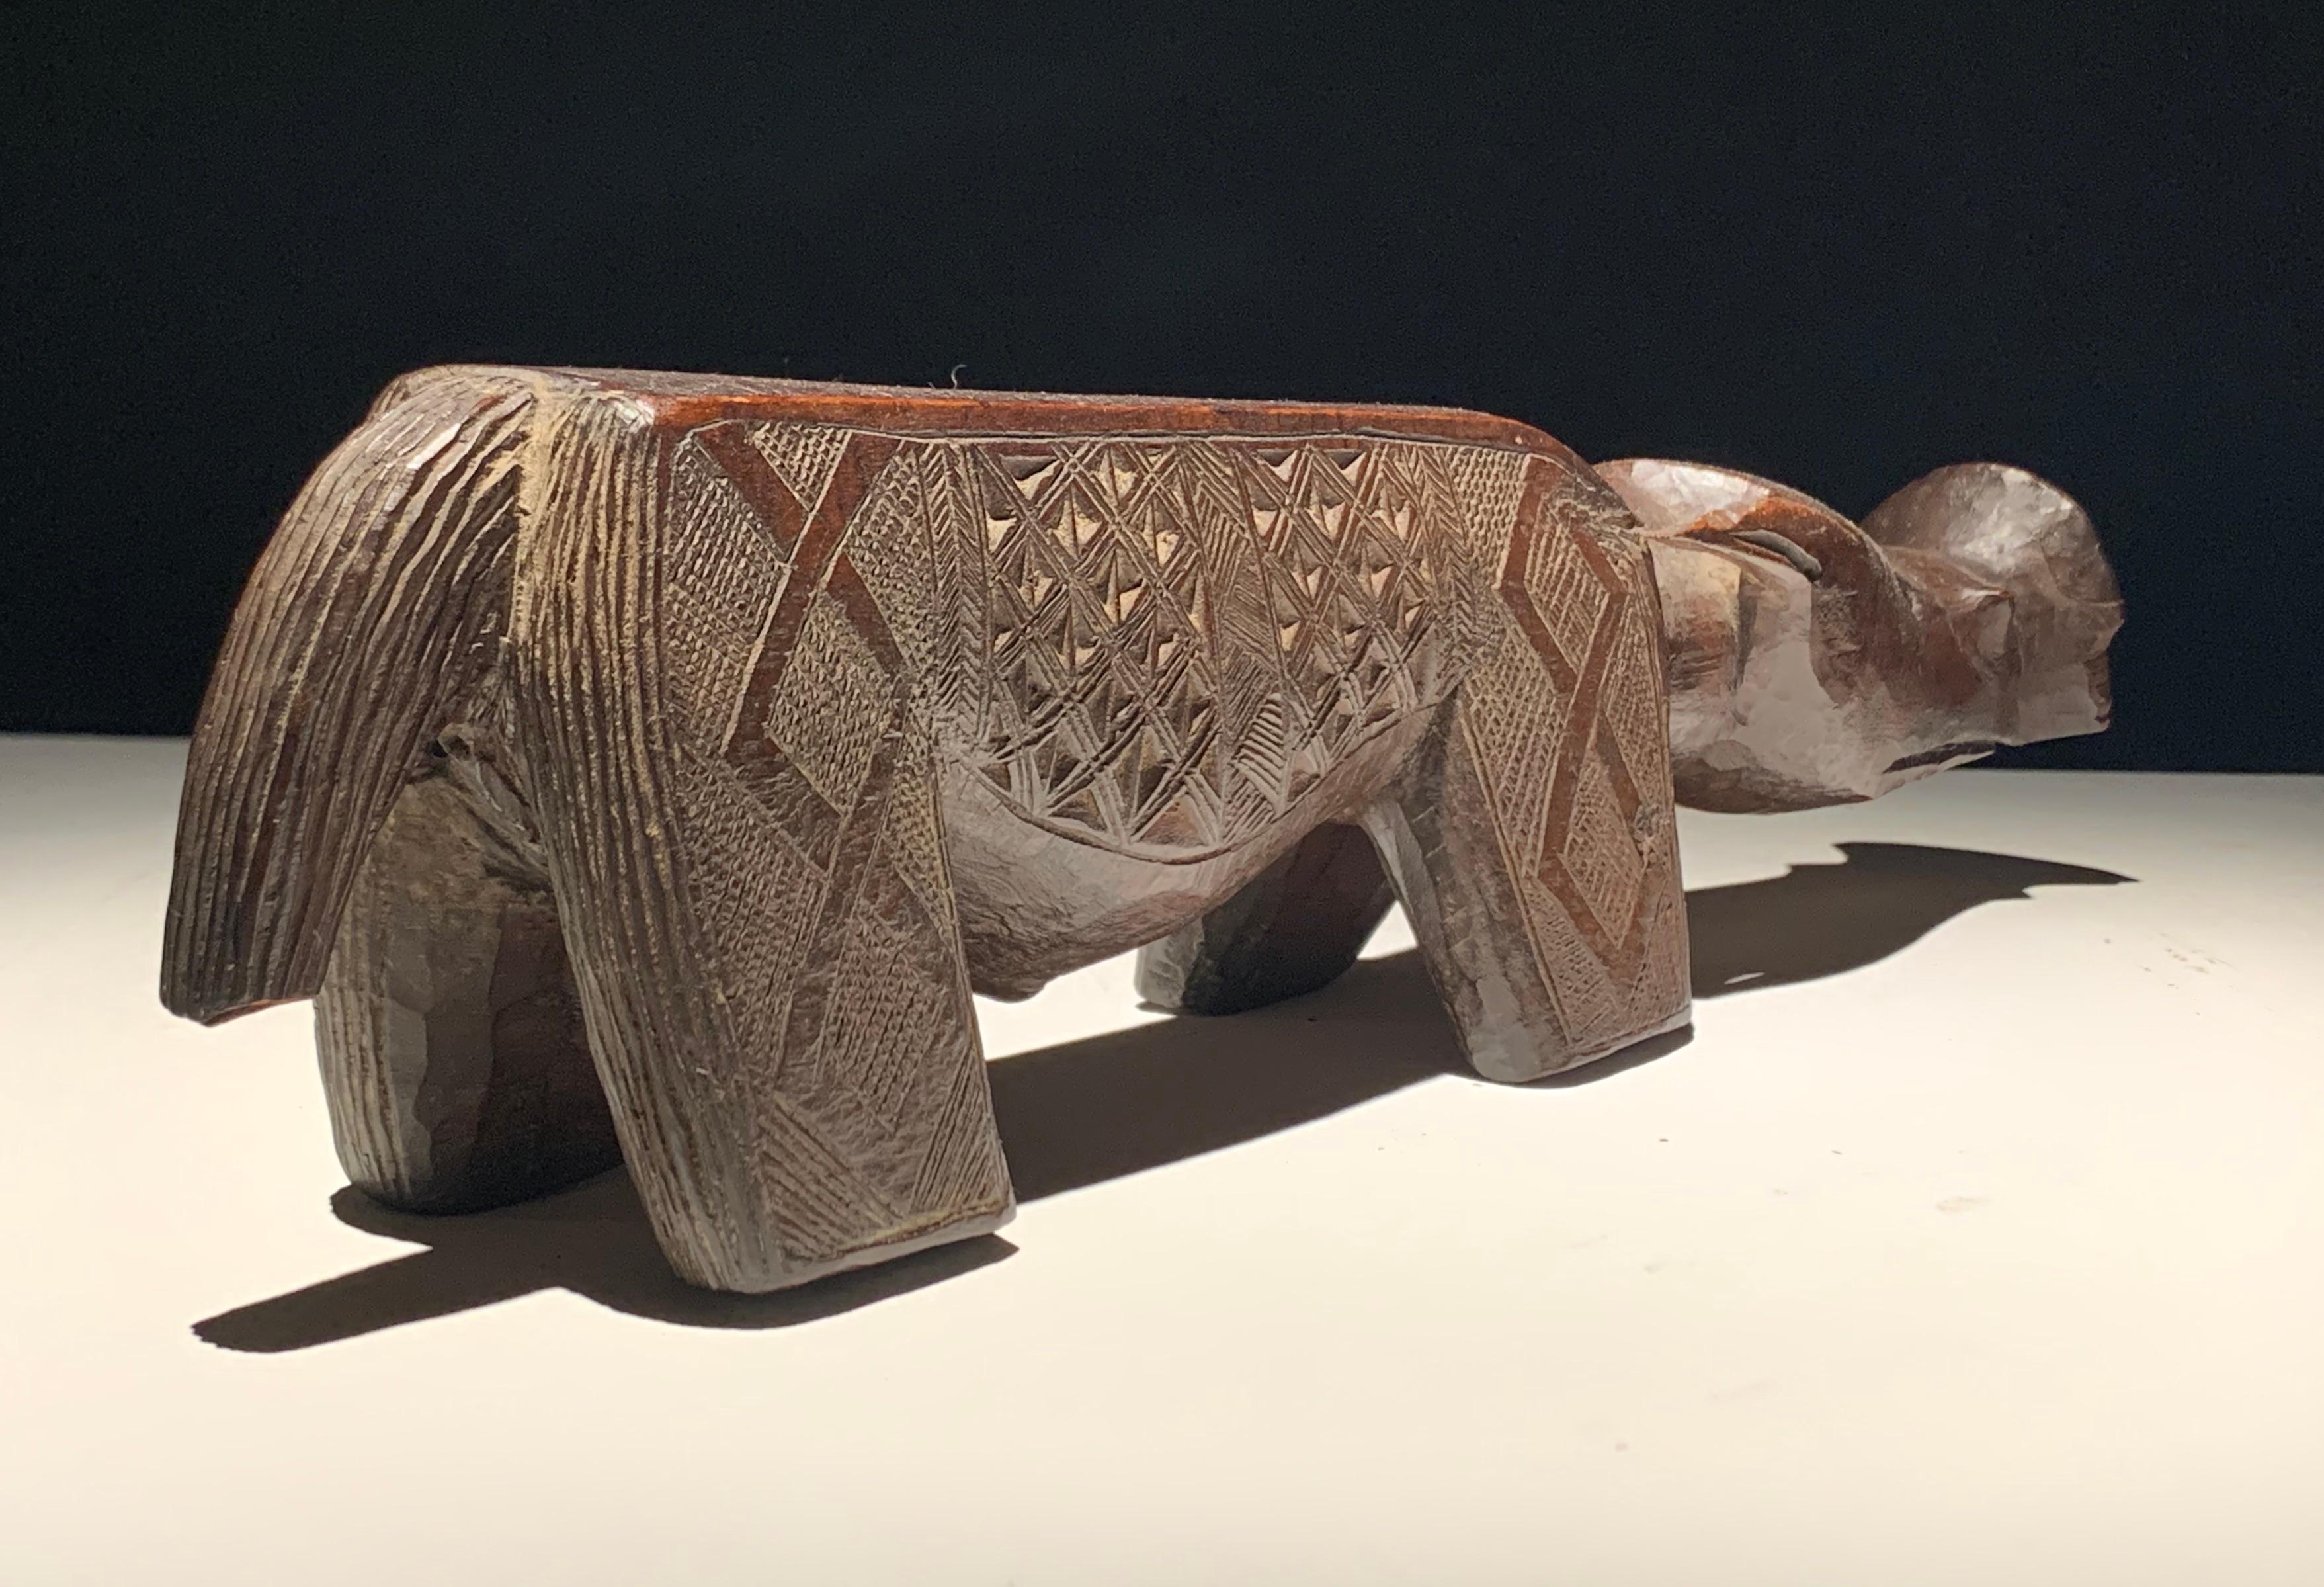 Warthog Divining Figure. Kuba, DRC. Late 19th century. Carved wood with palm oil patina, 12.5 incehes (l), 3.25 inches (h), 2 5/8 inches (d). Loss evident at tip of right ear and on snout. 

Provenance: Ex. collection Martin and Faith-Dorian Wright;